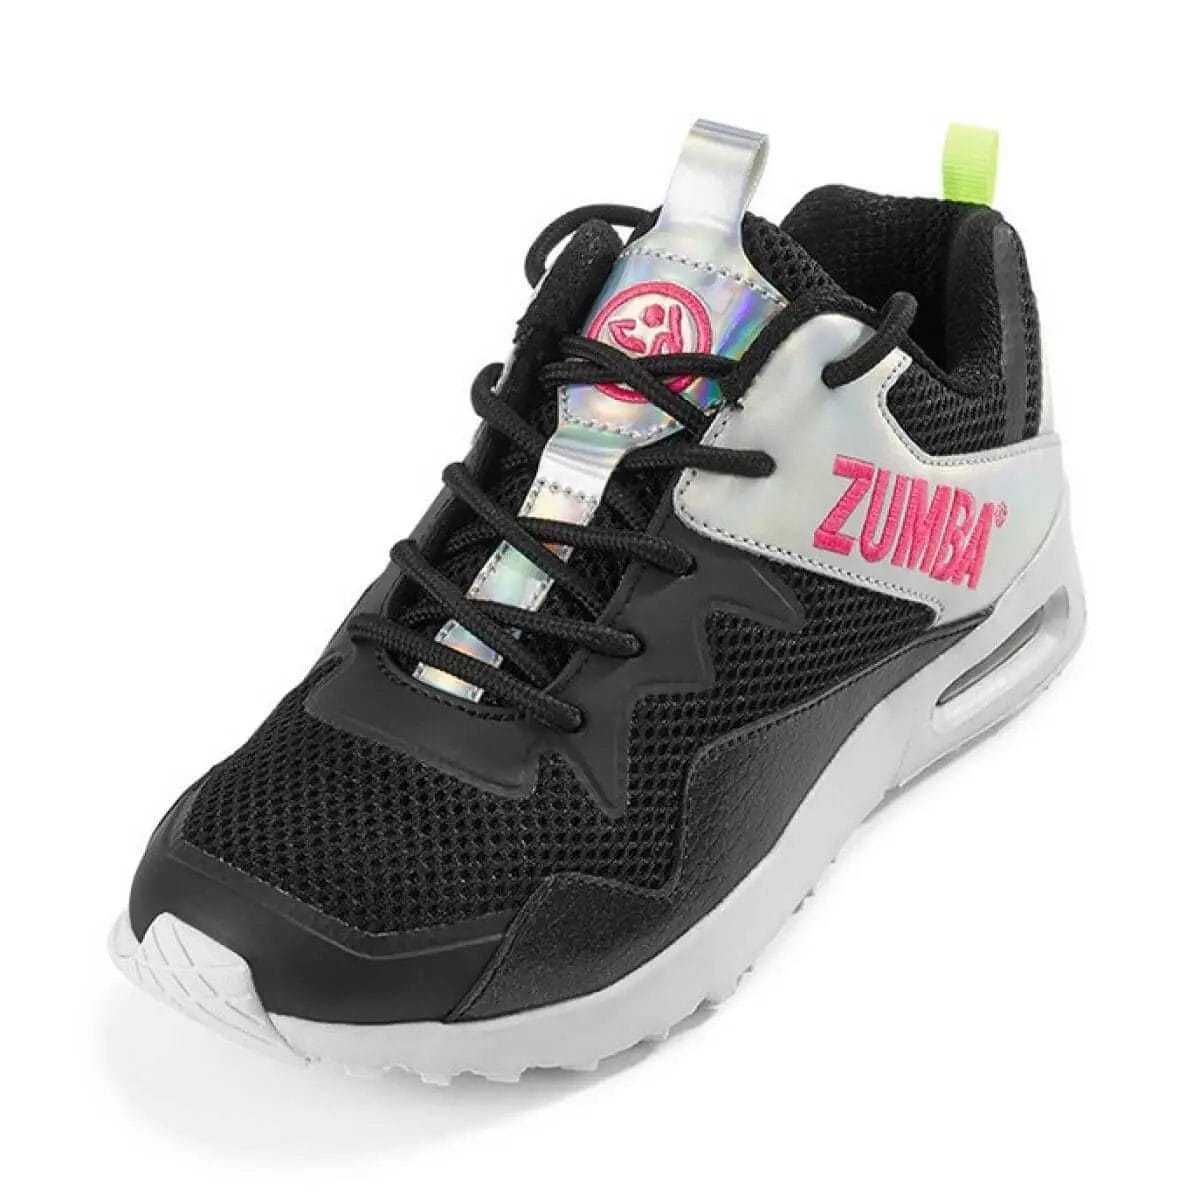 7 Best Shoes for Zumba Reviewed in 2022 | RunnerClick